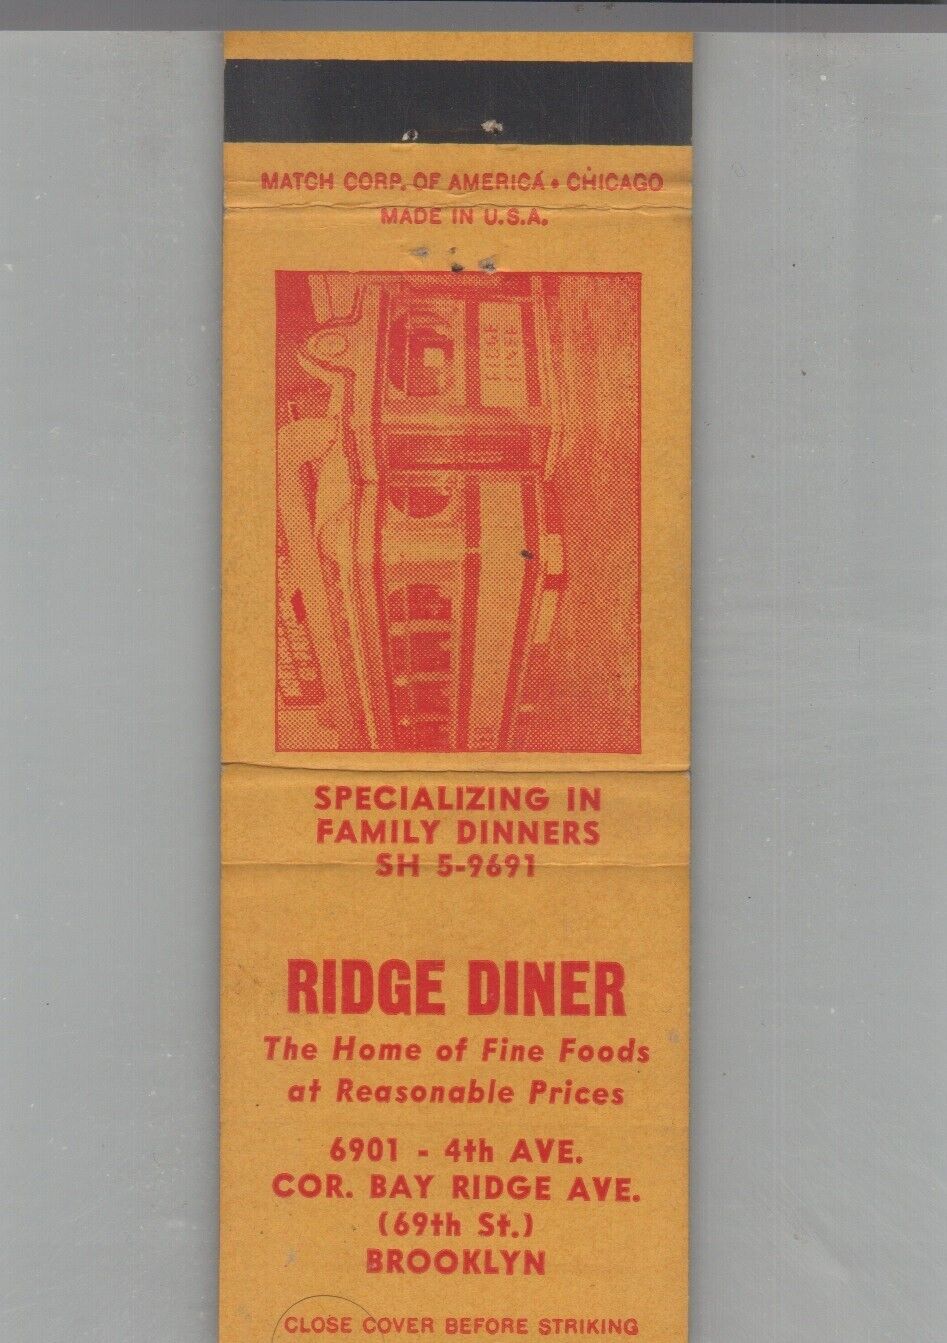 Matchbook Cover - Diner Ridge Diner Brooklyn, NY